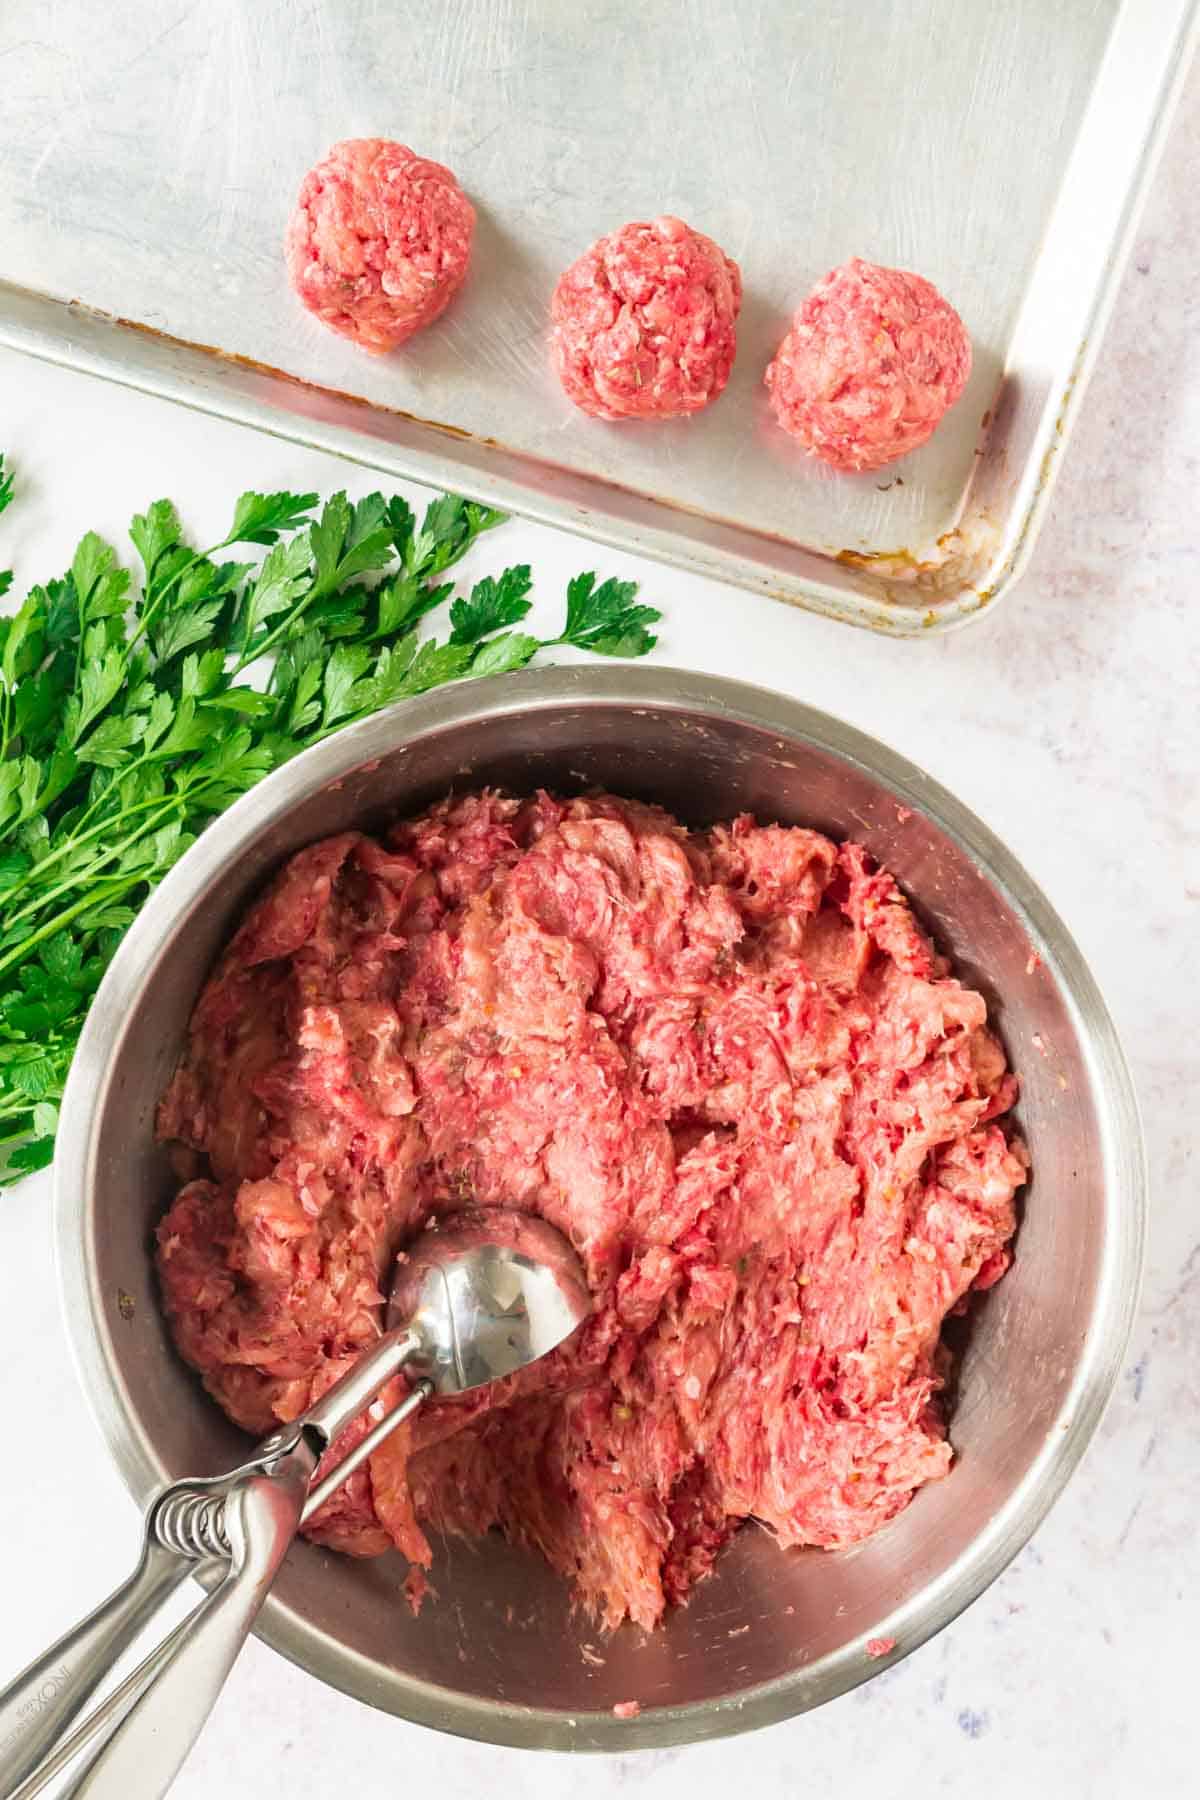 A scoop is used to portion the meat mixture into meatballs on a baking sheet.